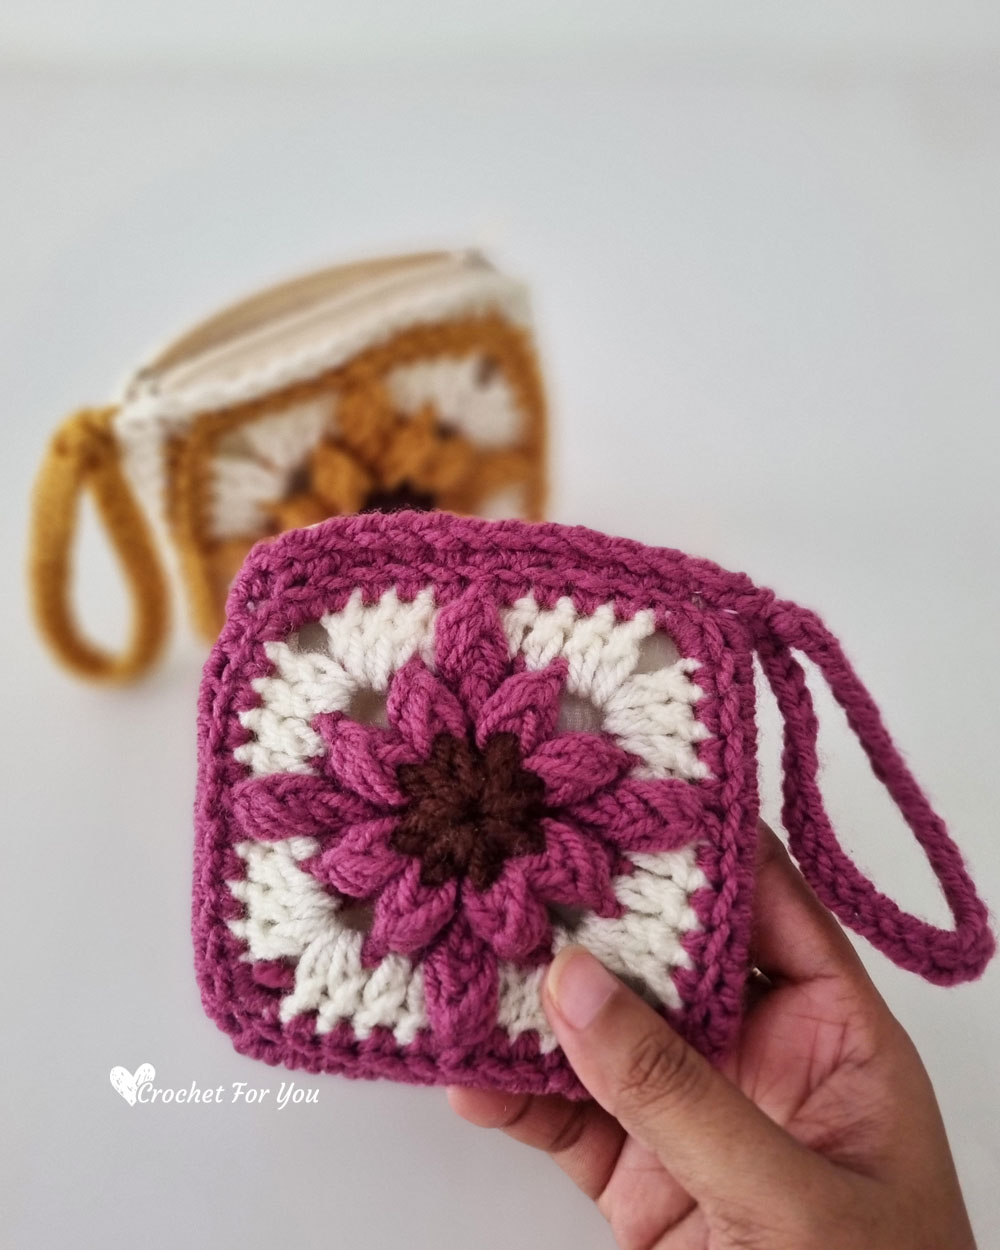 Personalize Crochet Coin Purse | Shopee Philippines